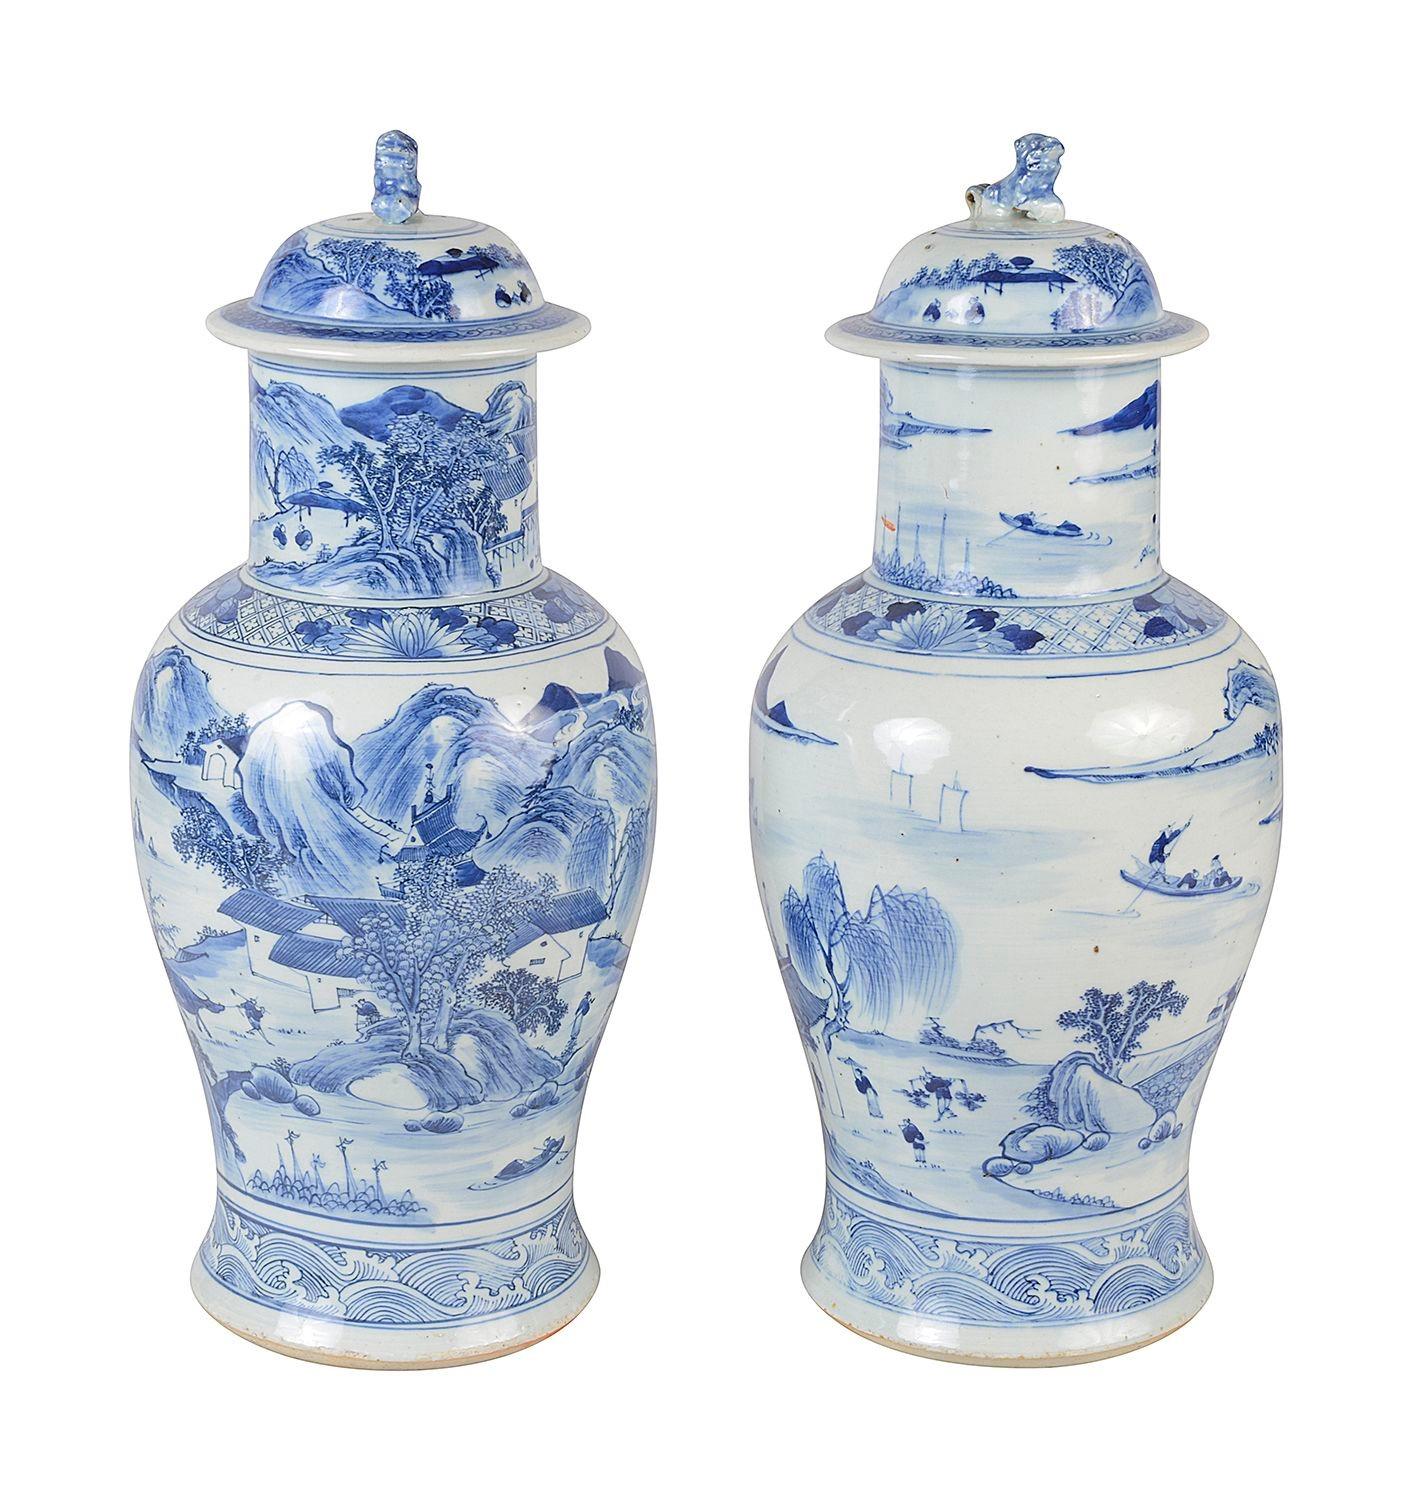 A good quality pair of late 19th Century Chinese Blue and White lidded vases, Foo dog finials to the lids, wonderful hand painted scenes of mountains, lakes and pagoda buildings, boarders of scrolling waves, motifs and flowers.


Batch 76 60645 BCEYZ